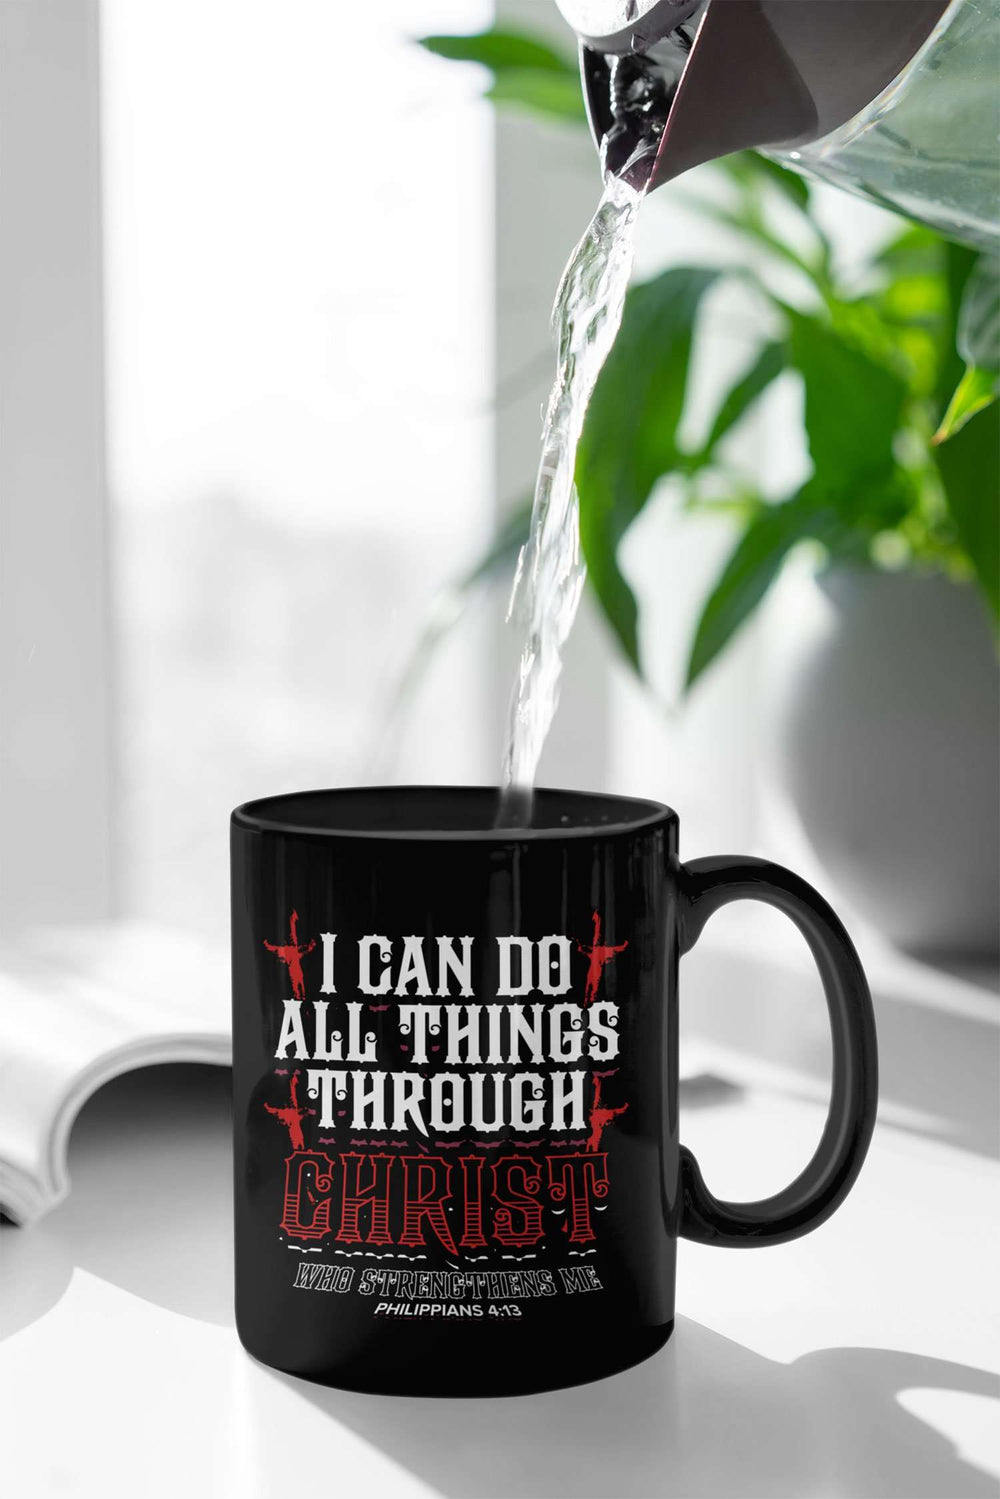 Designs by MyUtopia Shout Out:I Can Do All Things Through Christ Ceramic Coffee Mug - Black,11 oz / Black,Ceramic Coffee Mug